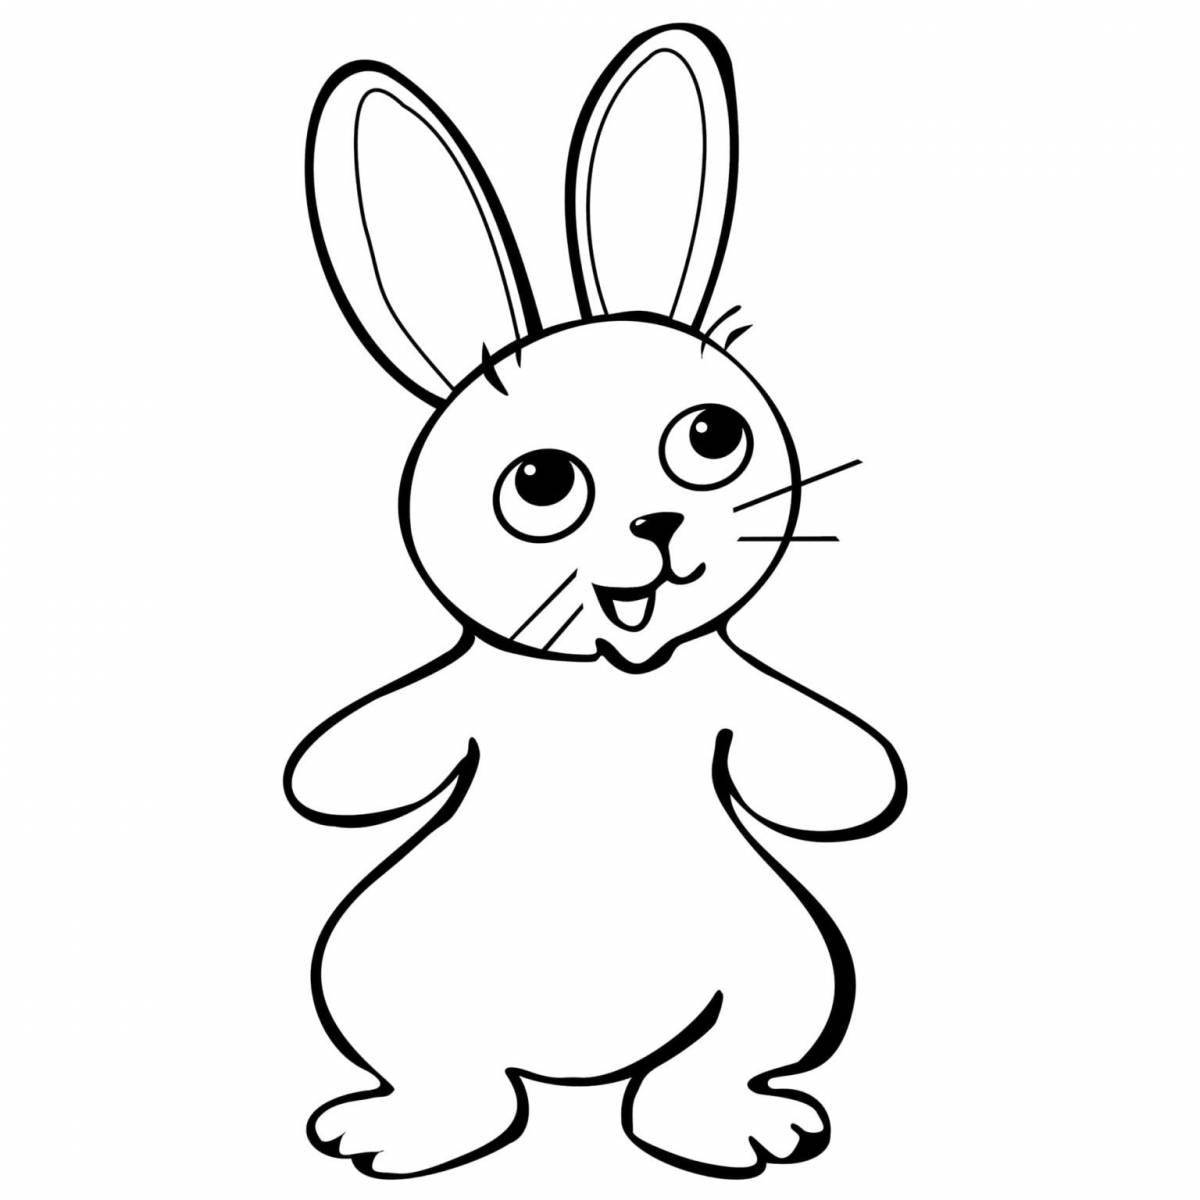 Fluffy bunny coloring book for 2 year olds